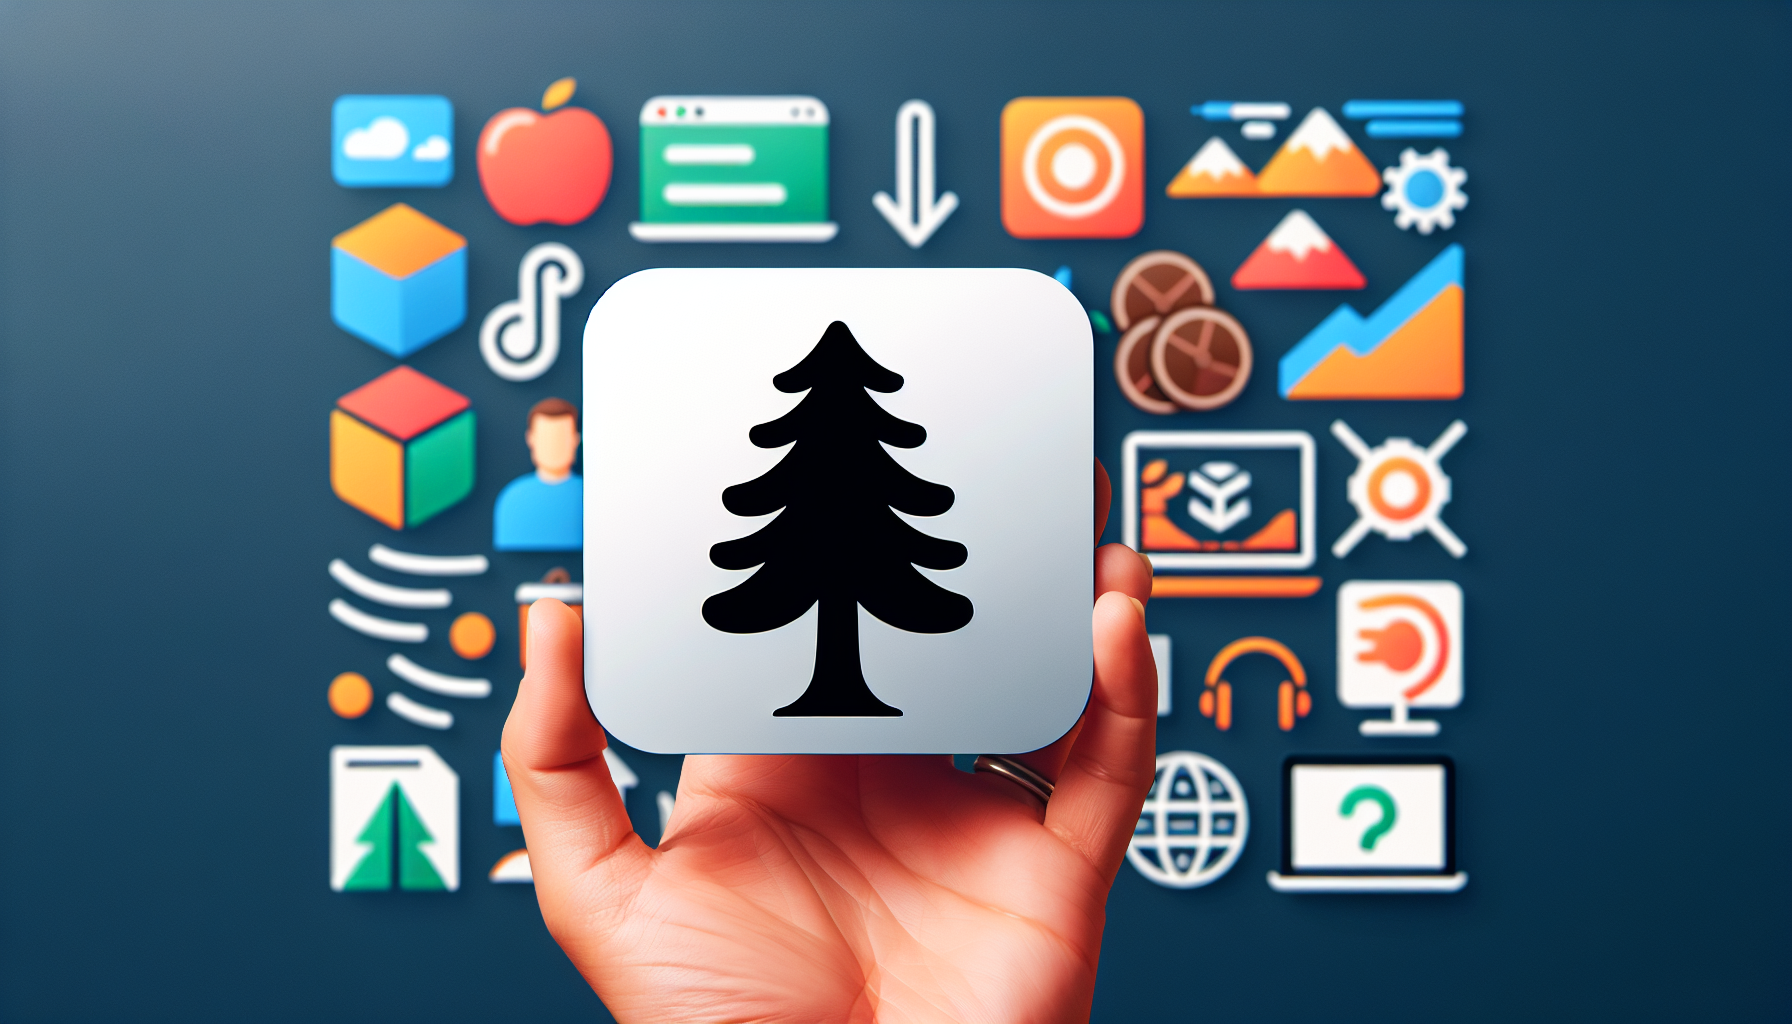 The Newest macOS Sequoia Feature Will Not Be Available Upon Initial Release